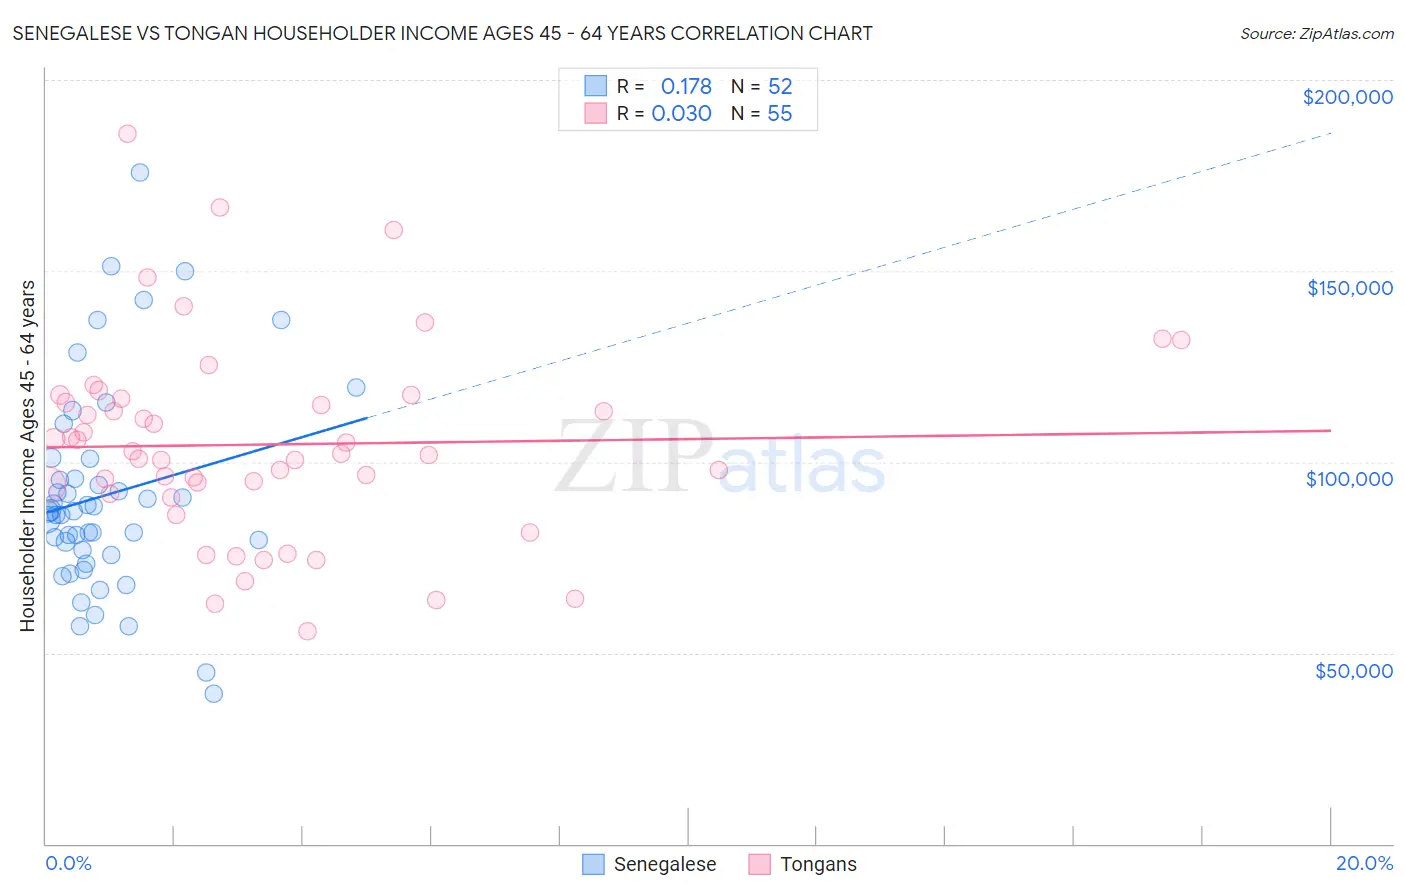 Senegalese vs Tongan Householder Income Ages 45 - 64 years